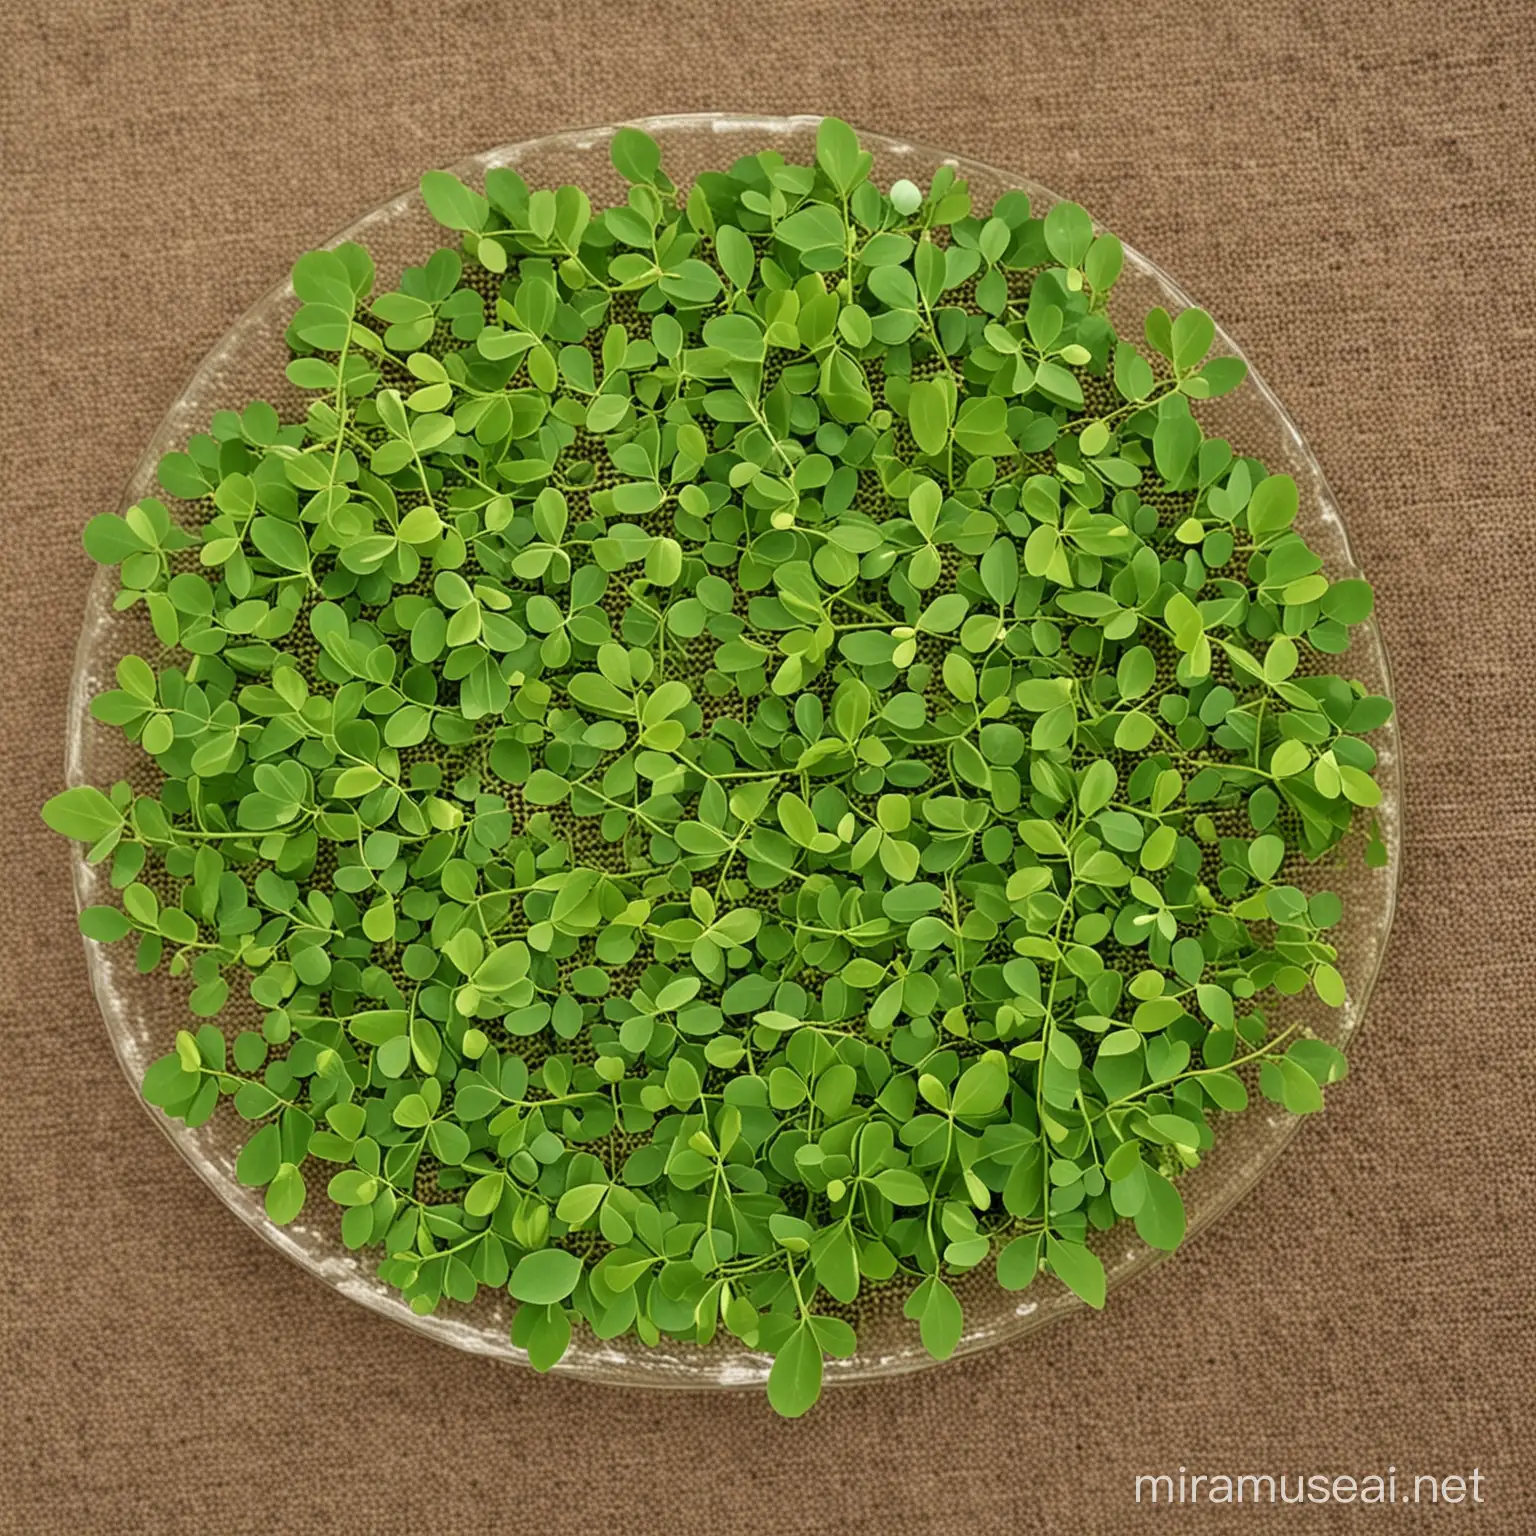 Vibrant Moringa Leaf Images Fresh Green Leaves with Health Benefits